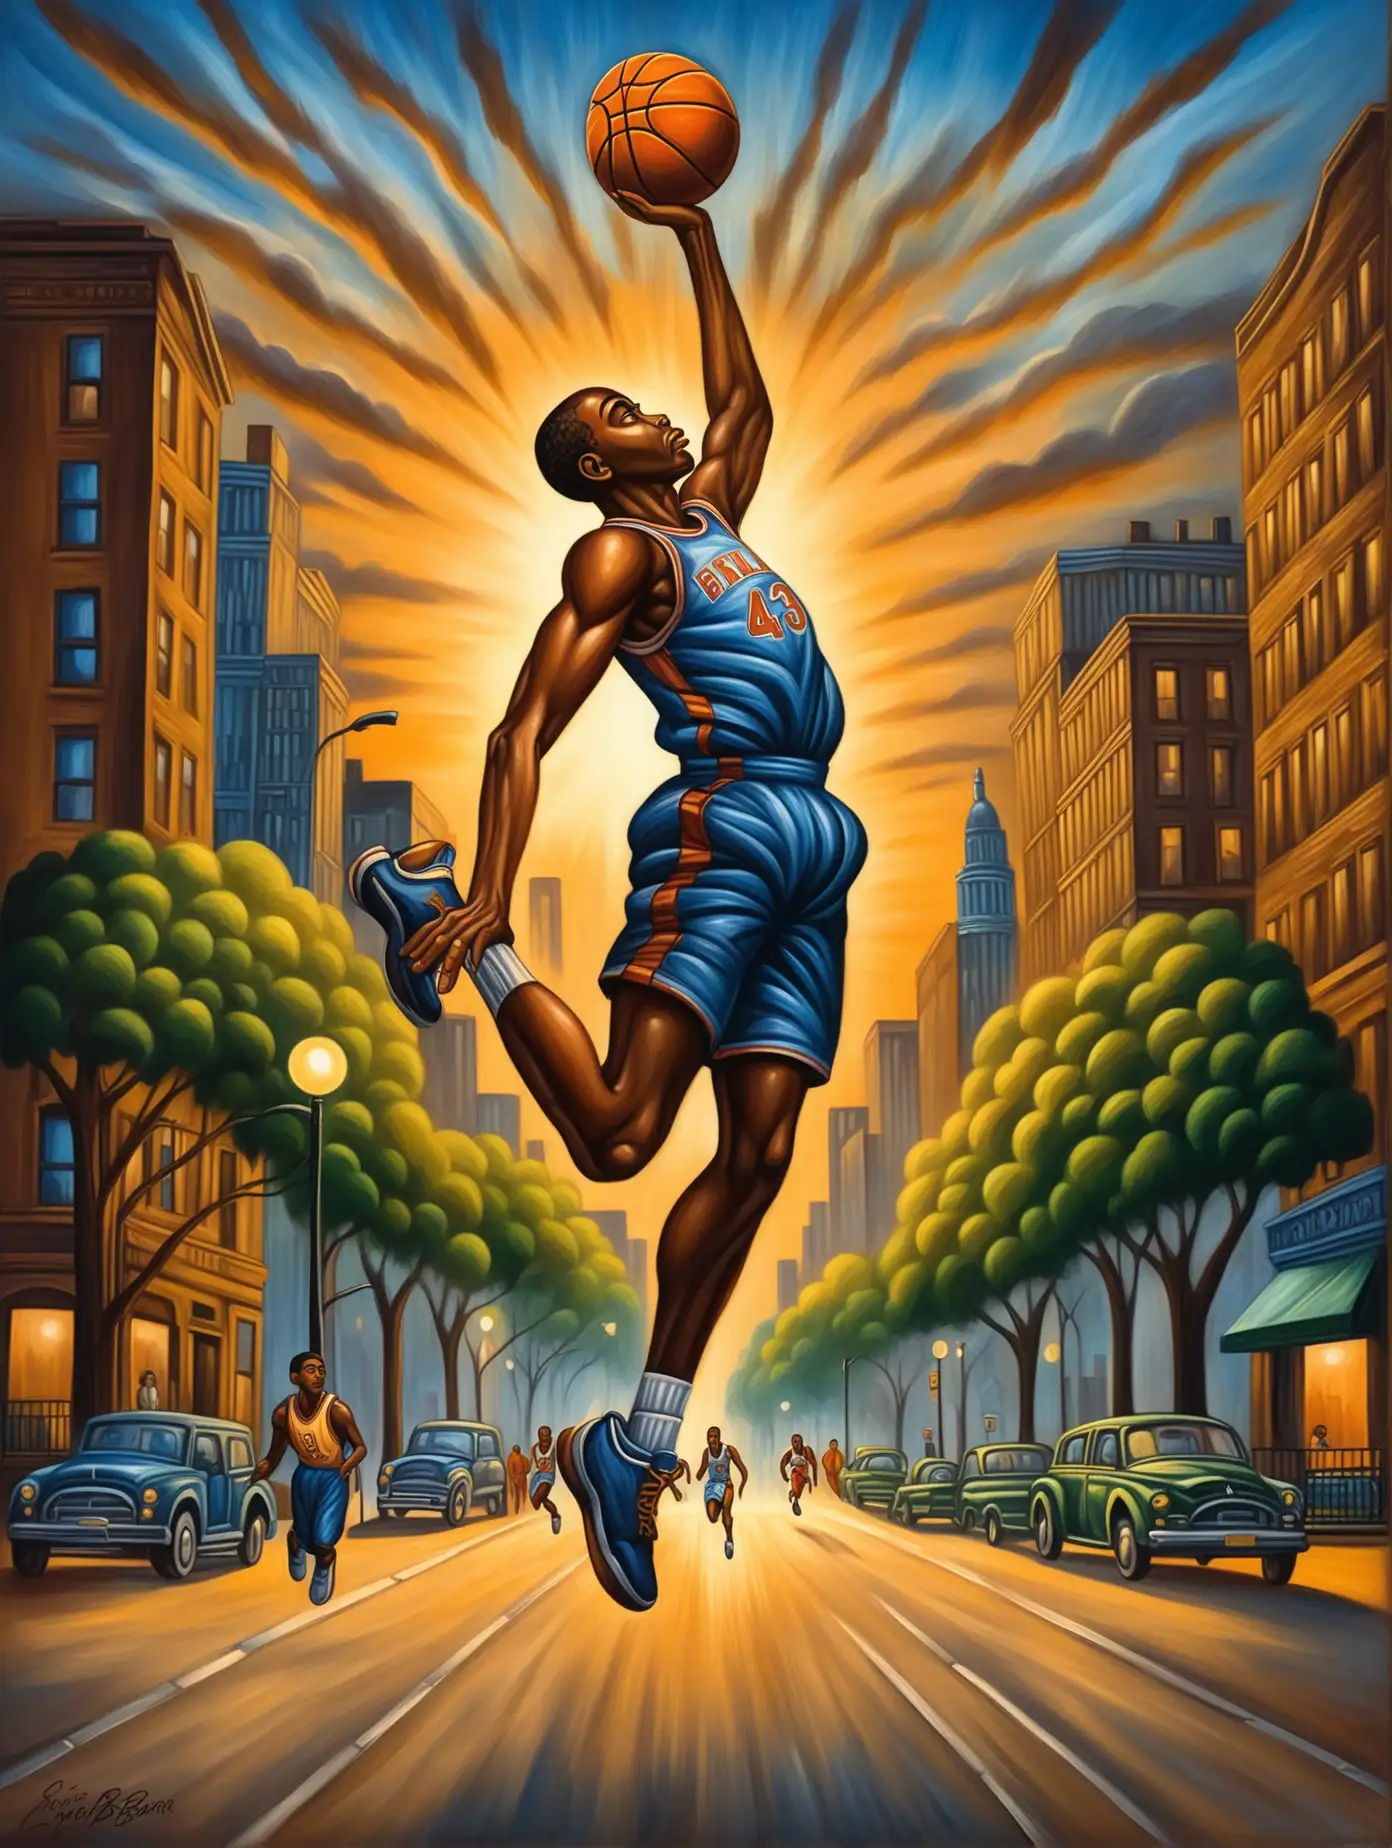 AfricanAmerican Basketball Player Jumping in Urban Park at Dusk